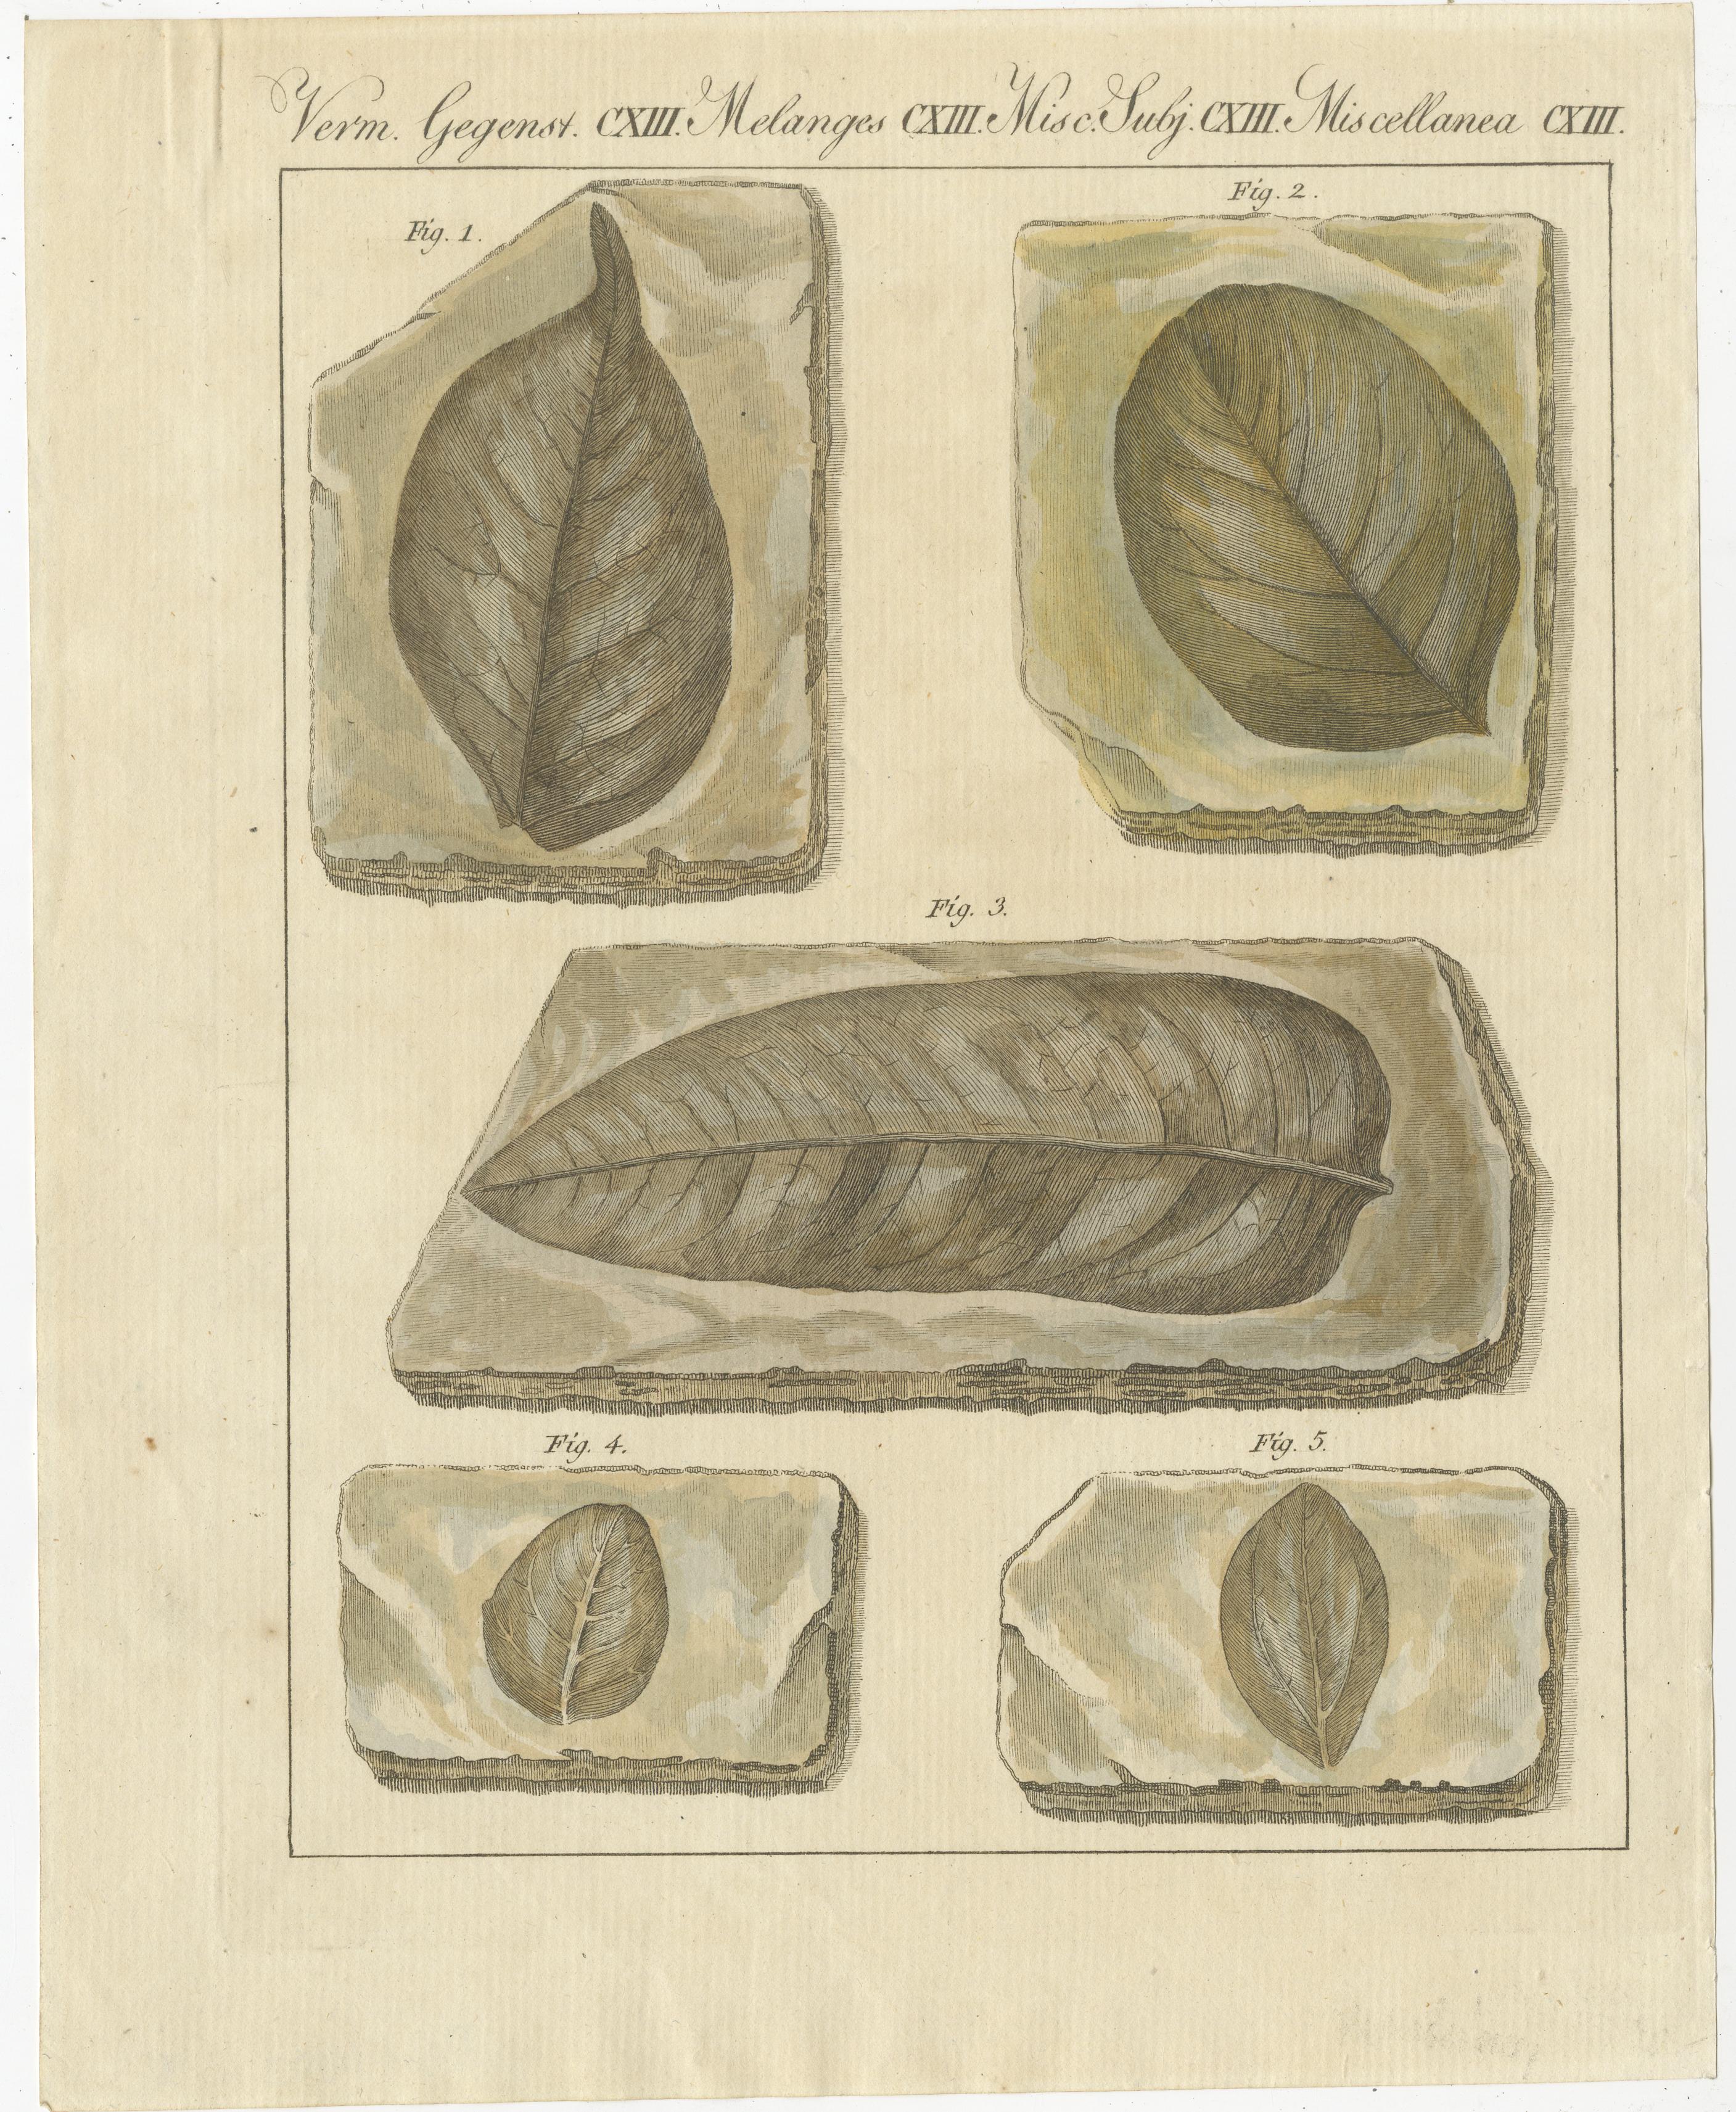 Original antique print of fossil leaves from the Prehistoric period. This print originates from 'Bilderbuch fur Kinder' by F.J. Bertuch. Friedrich Johann Bertuch (1747-1822) was a German publisher and man of arts most famous for his 12-volume